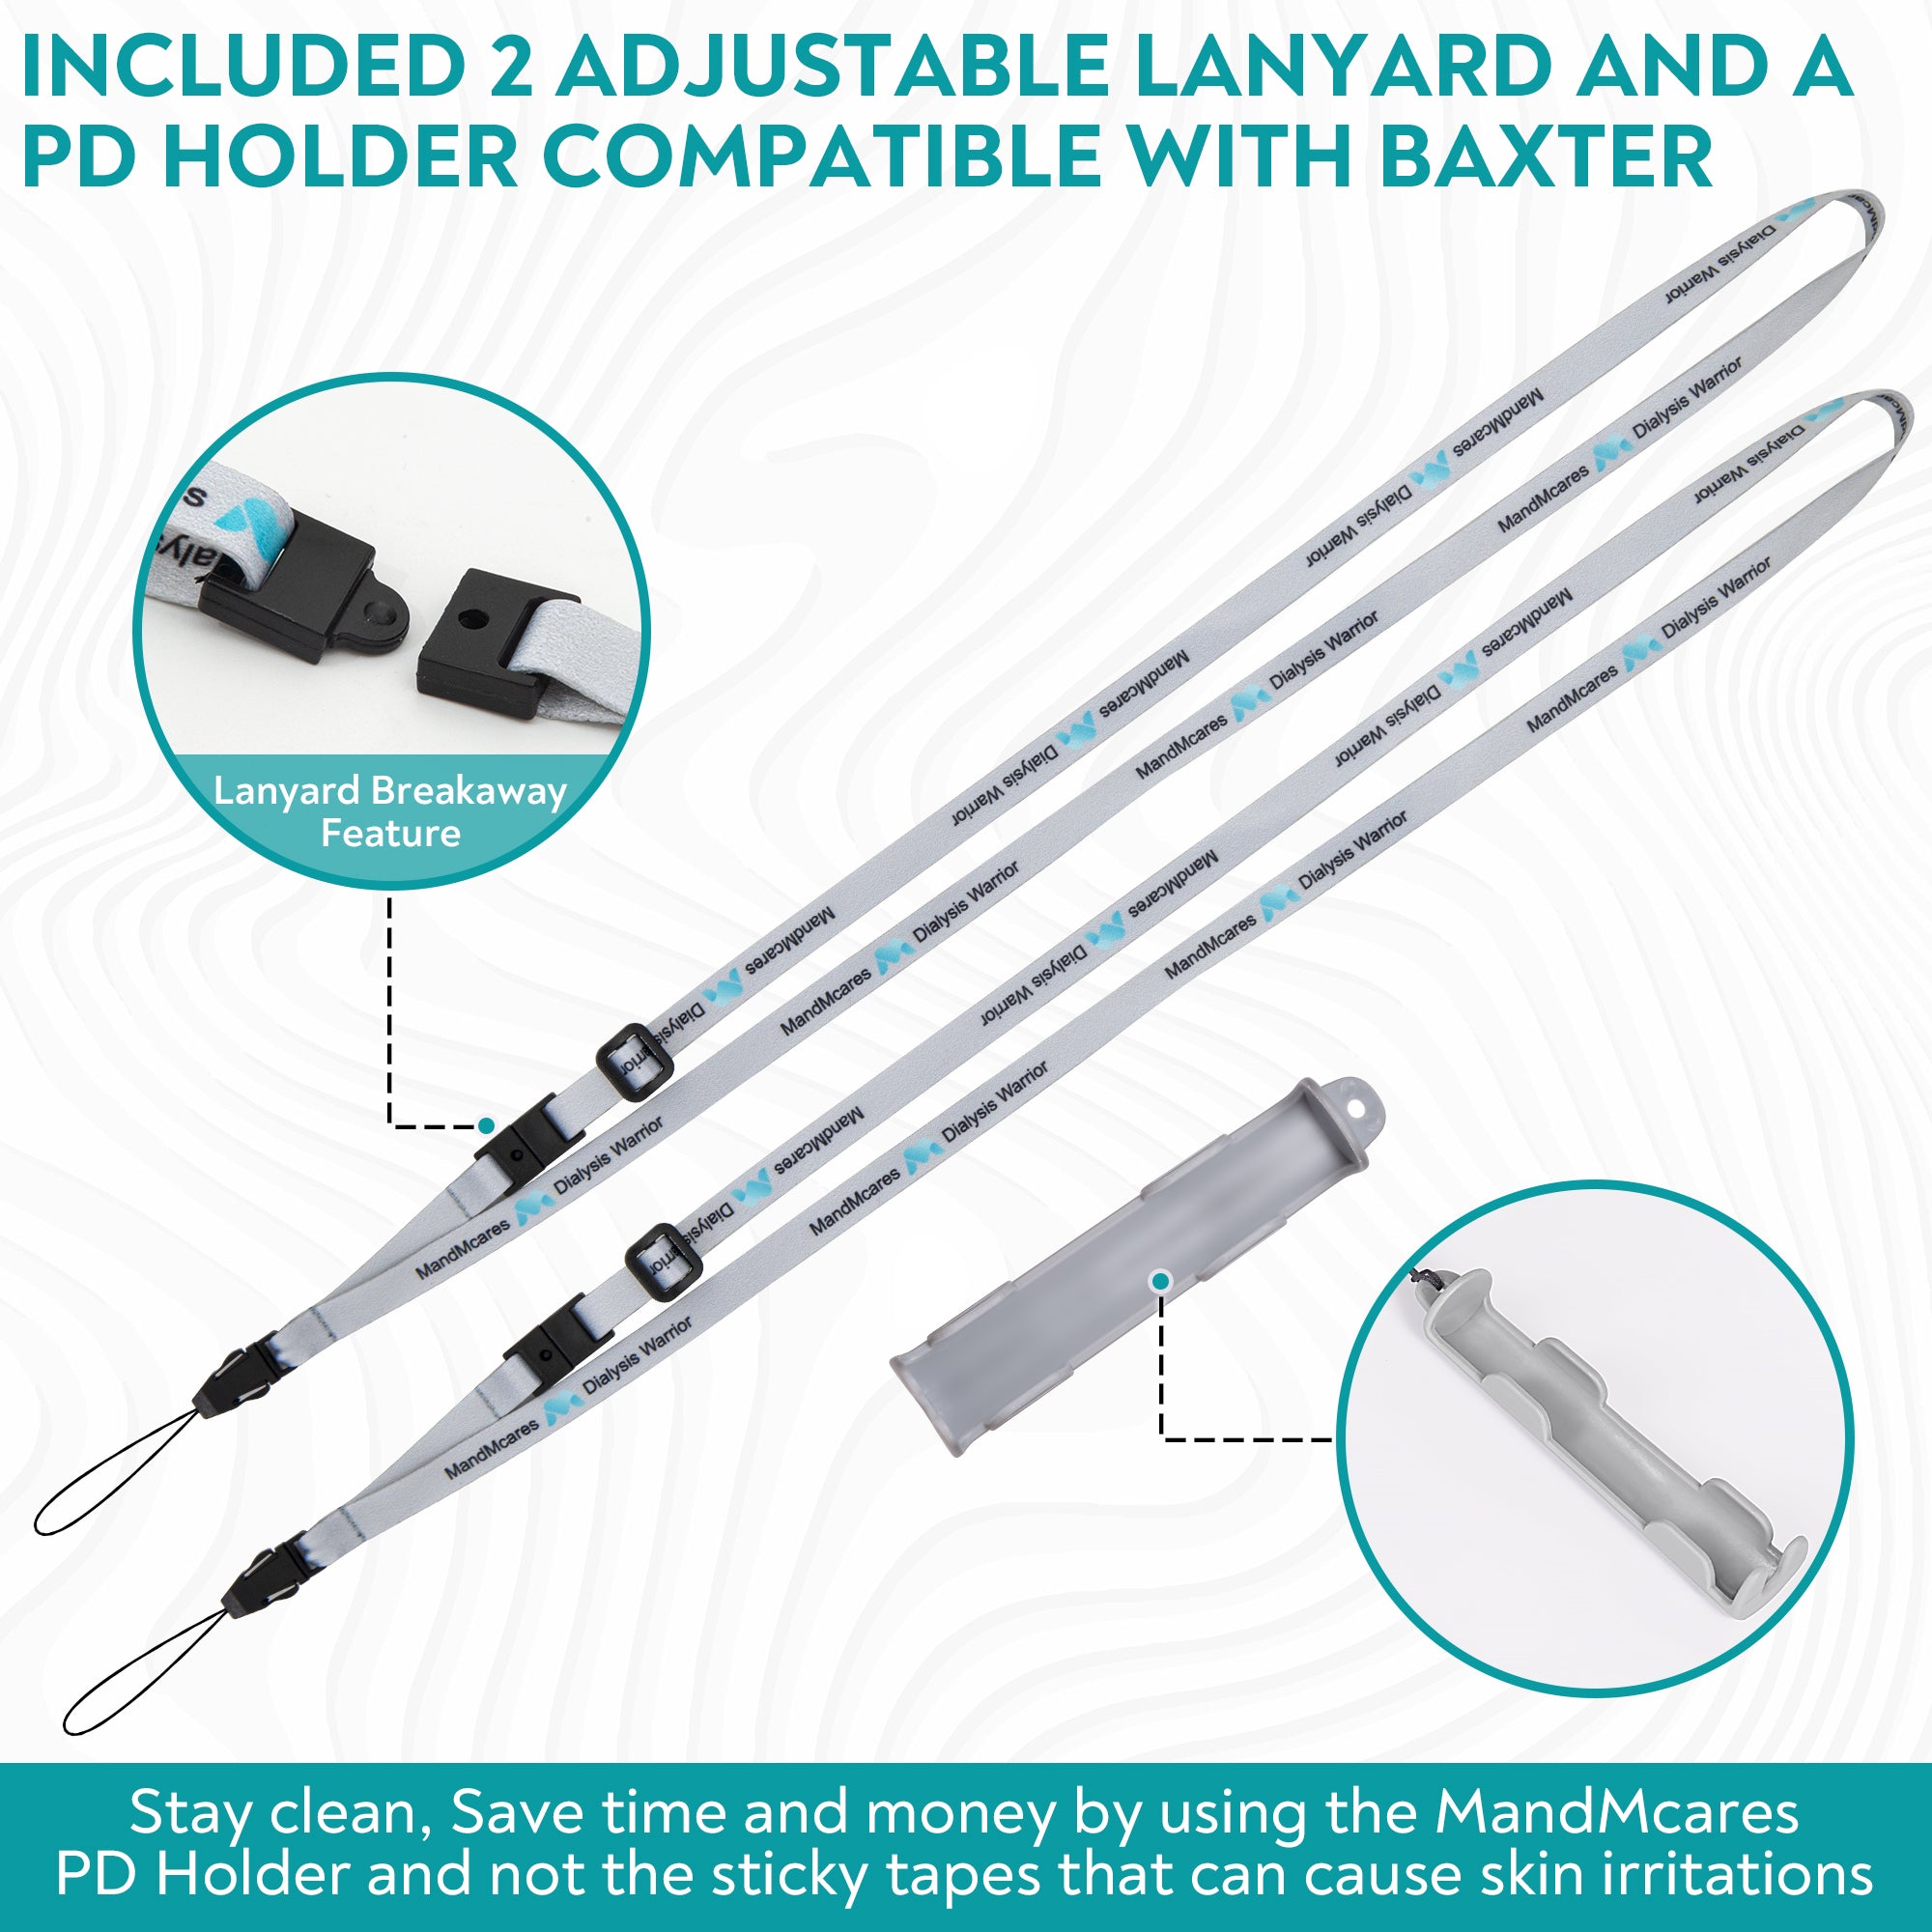 New PD Transfer Set Holder for Baxter2.0 | Lanyards w/ Breakaway Feature